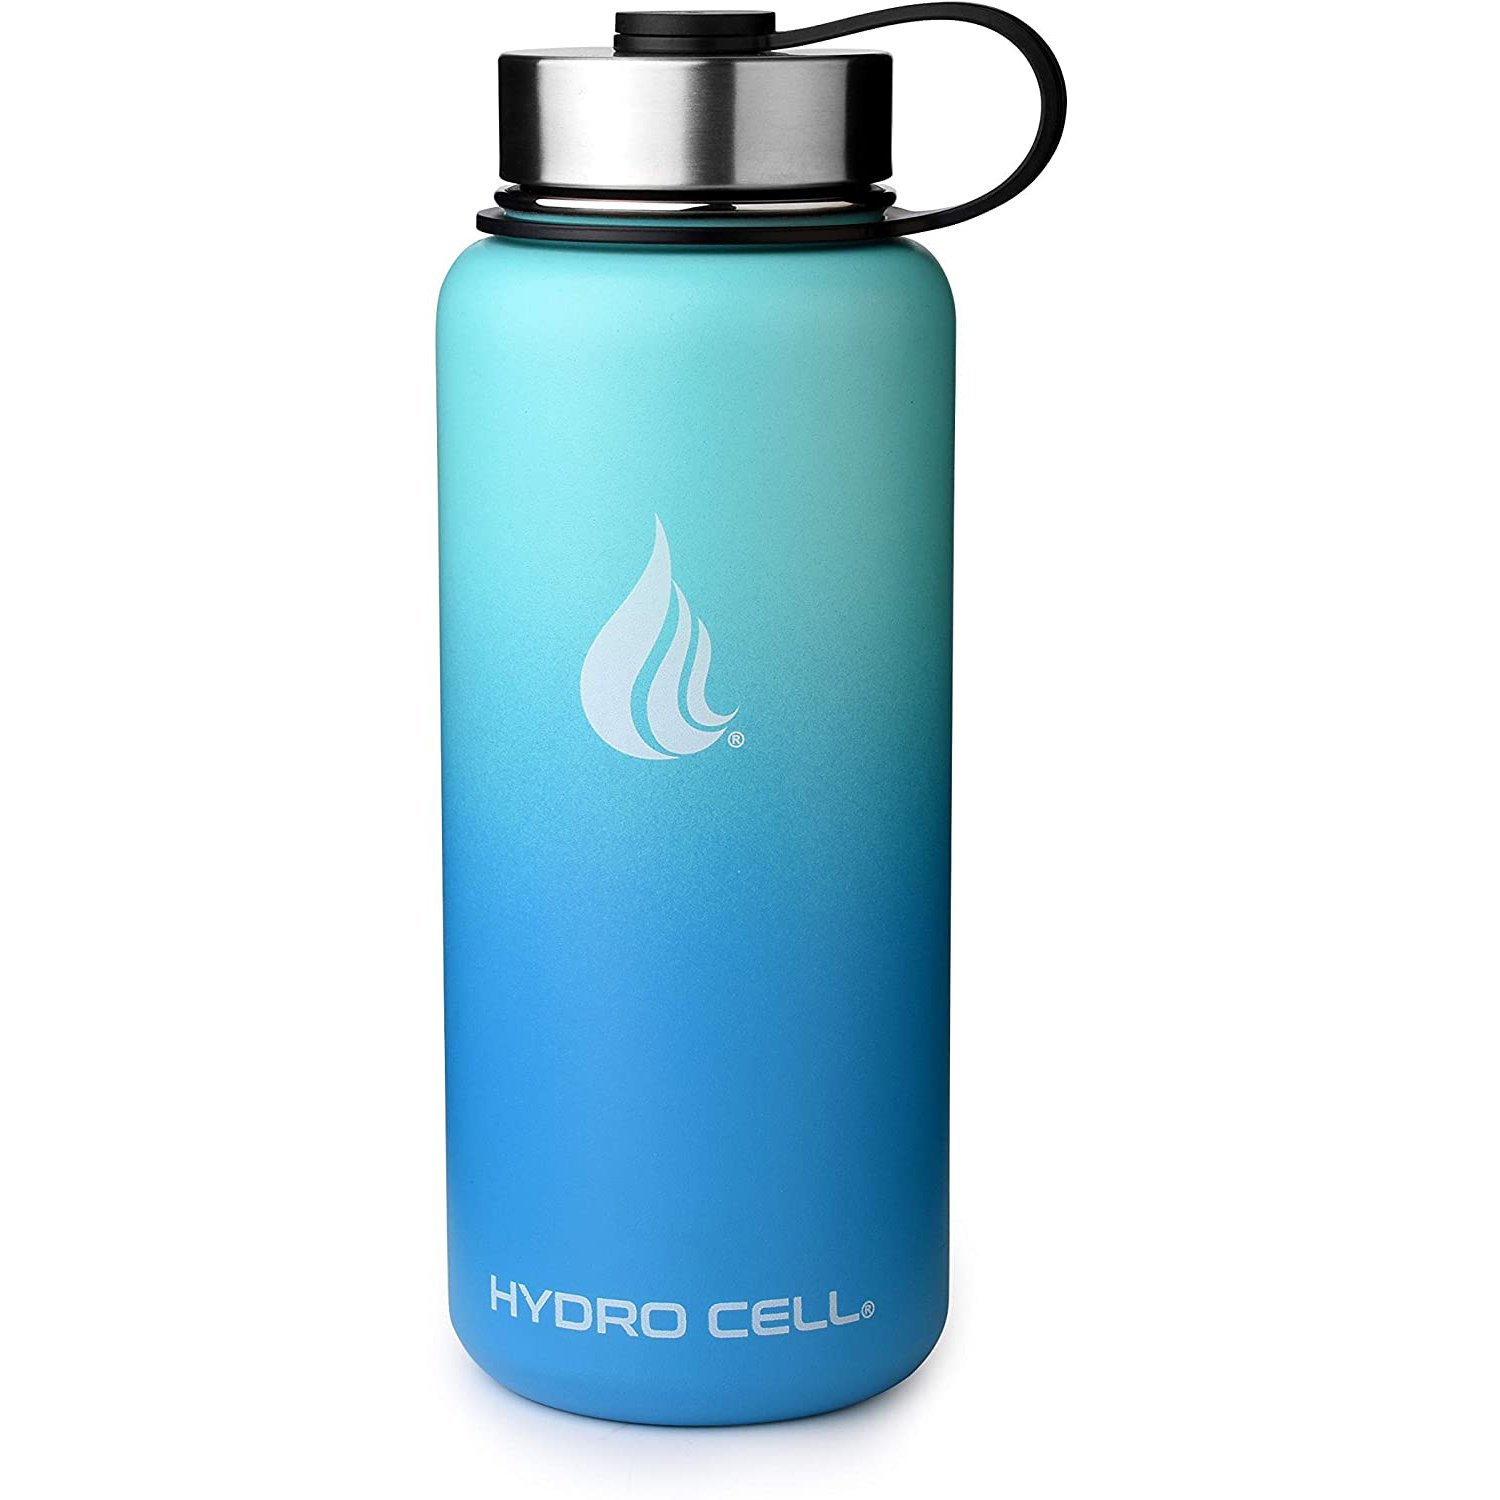 32oz (Fluid Ounces) Wide Mouth Hydro Cell Stainless Steel Water Bottle Teal/Blue - image 1 of 3